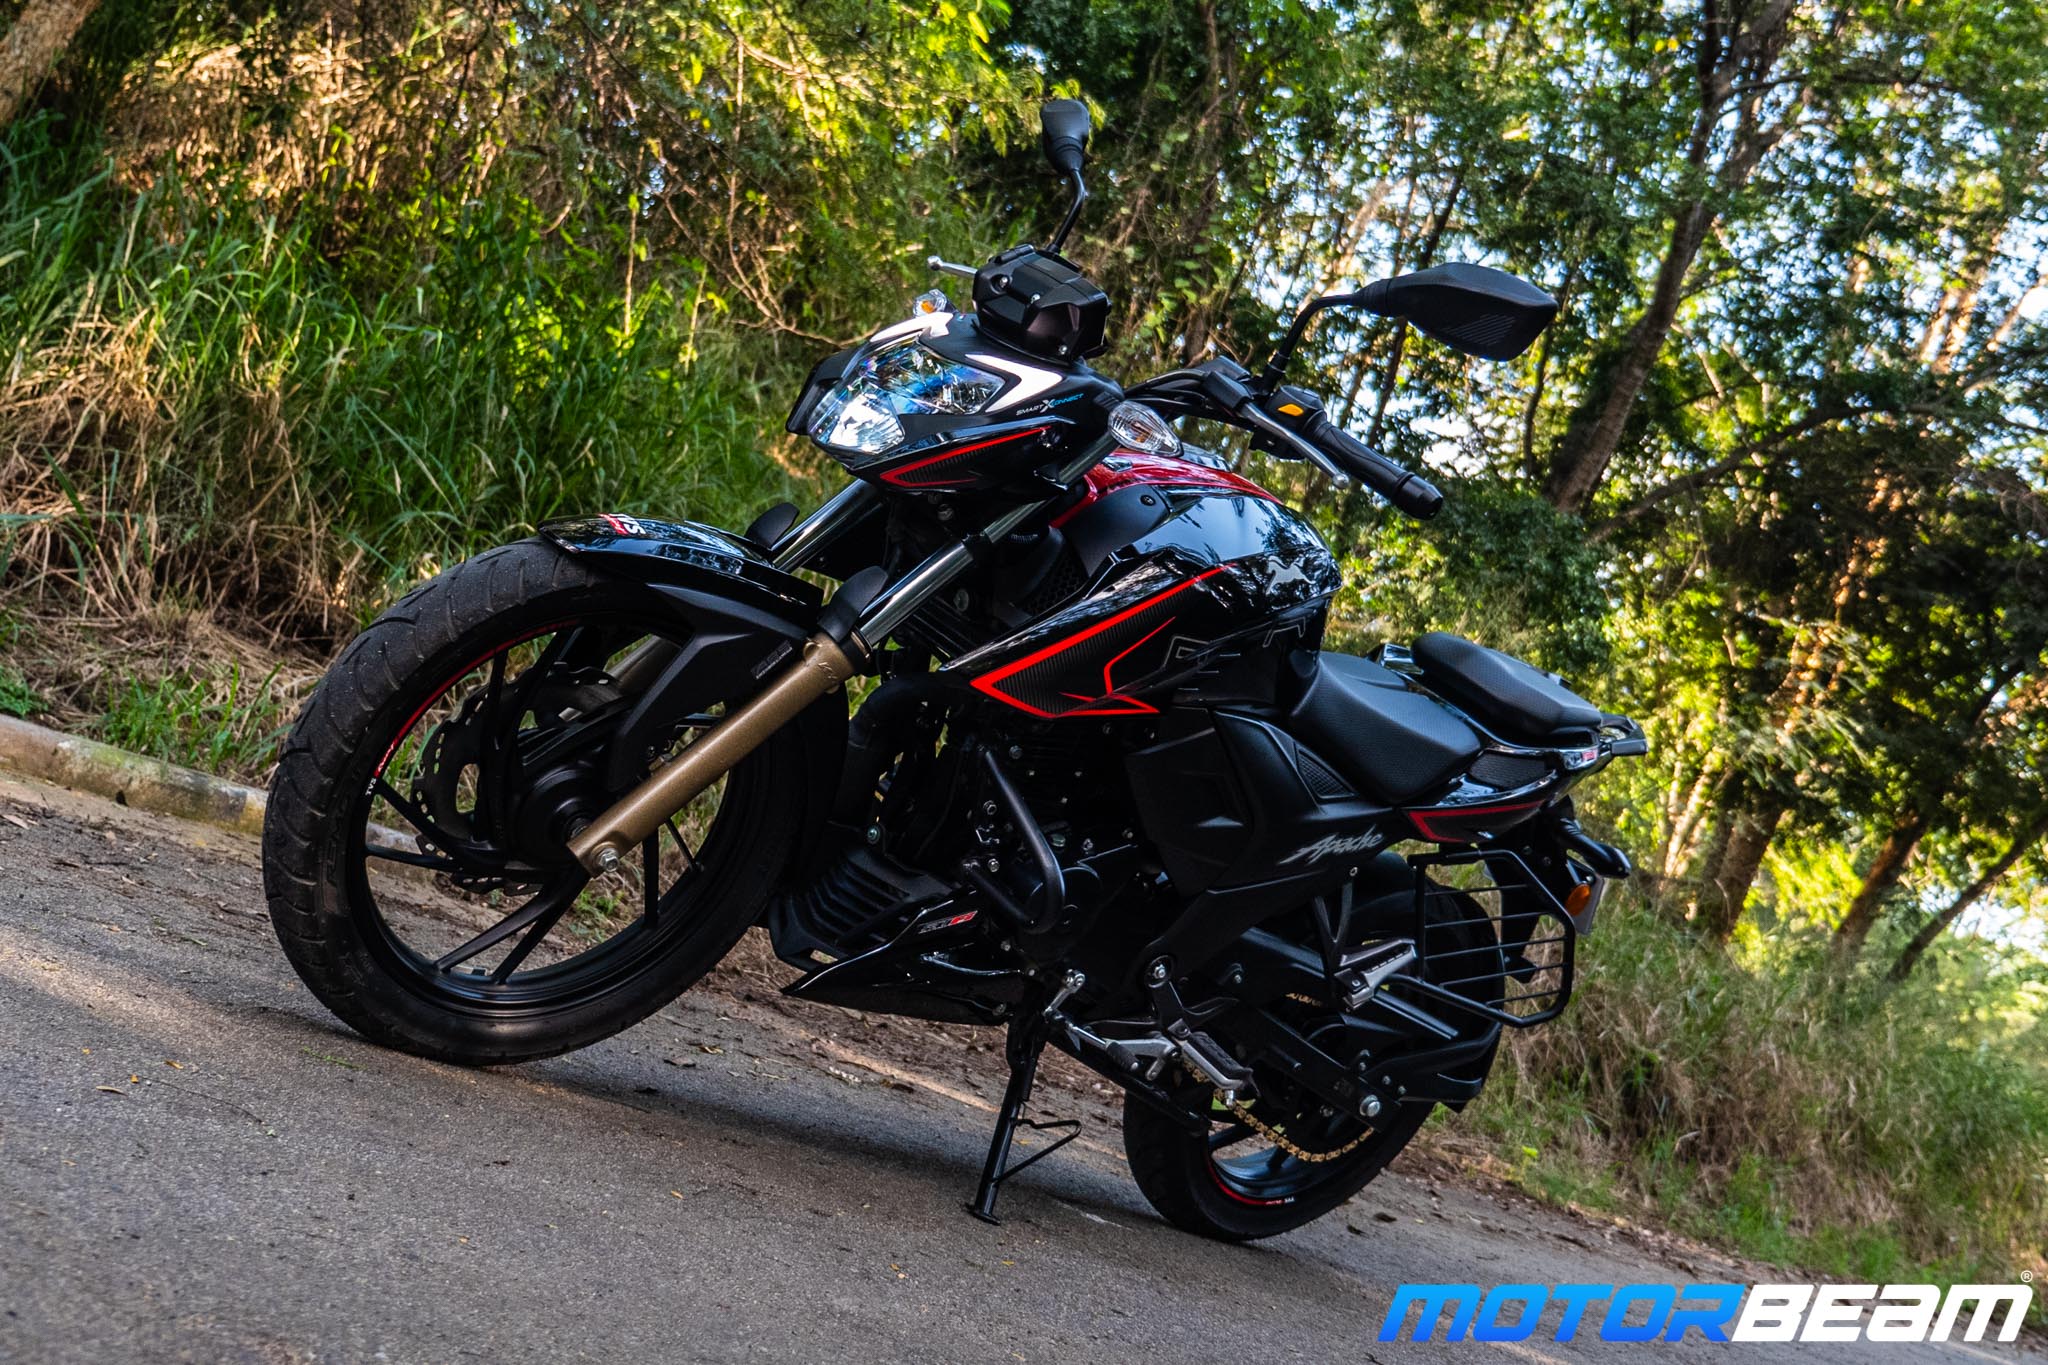 2020 TVS Apache 200 Review Test Ride